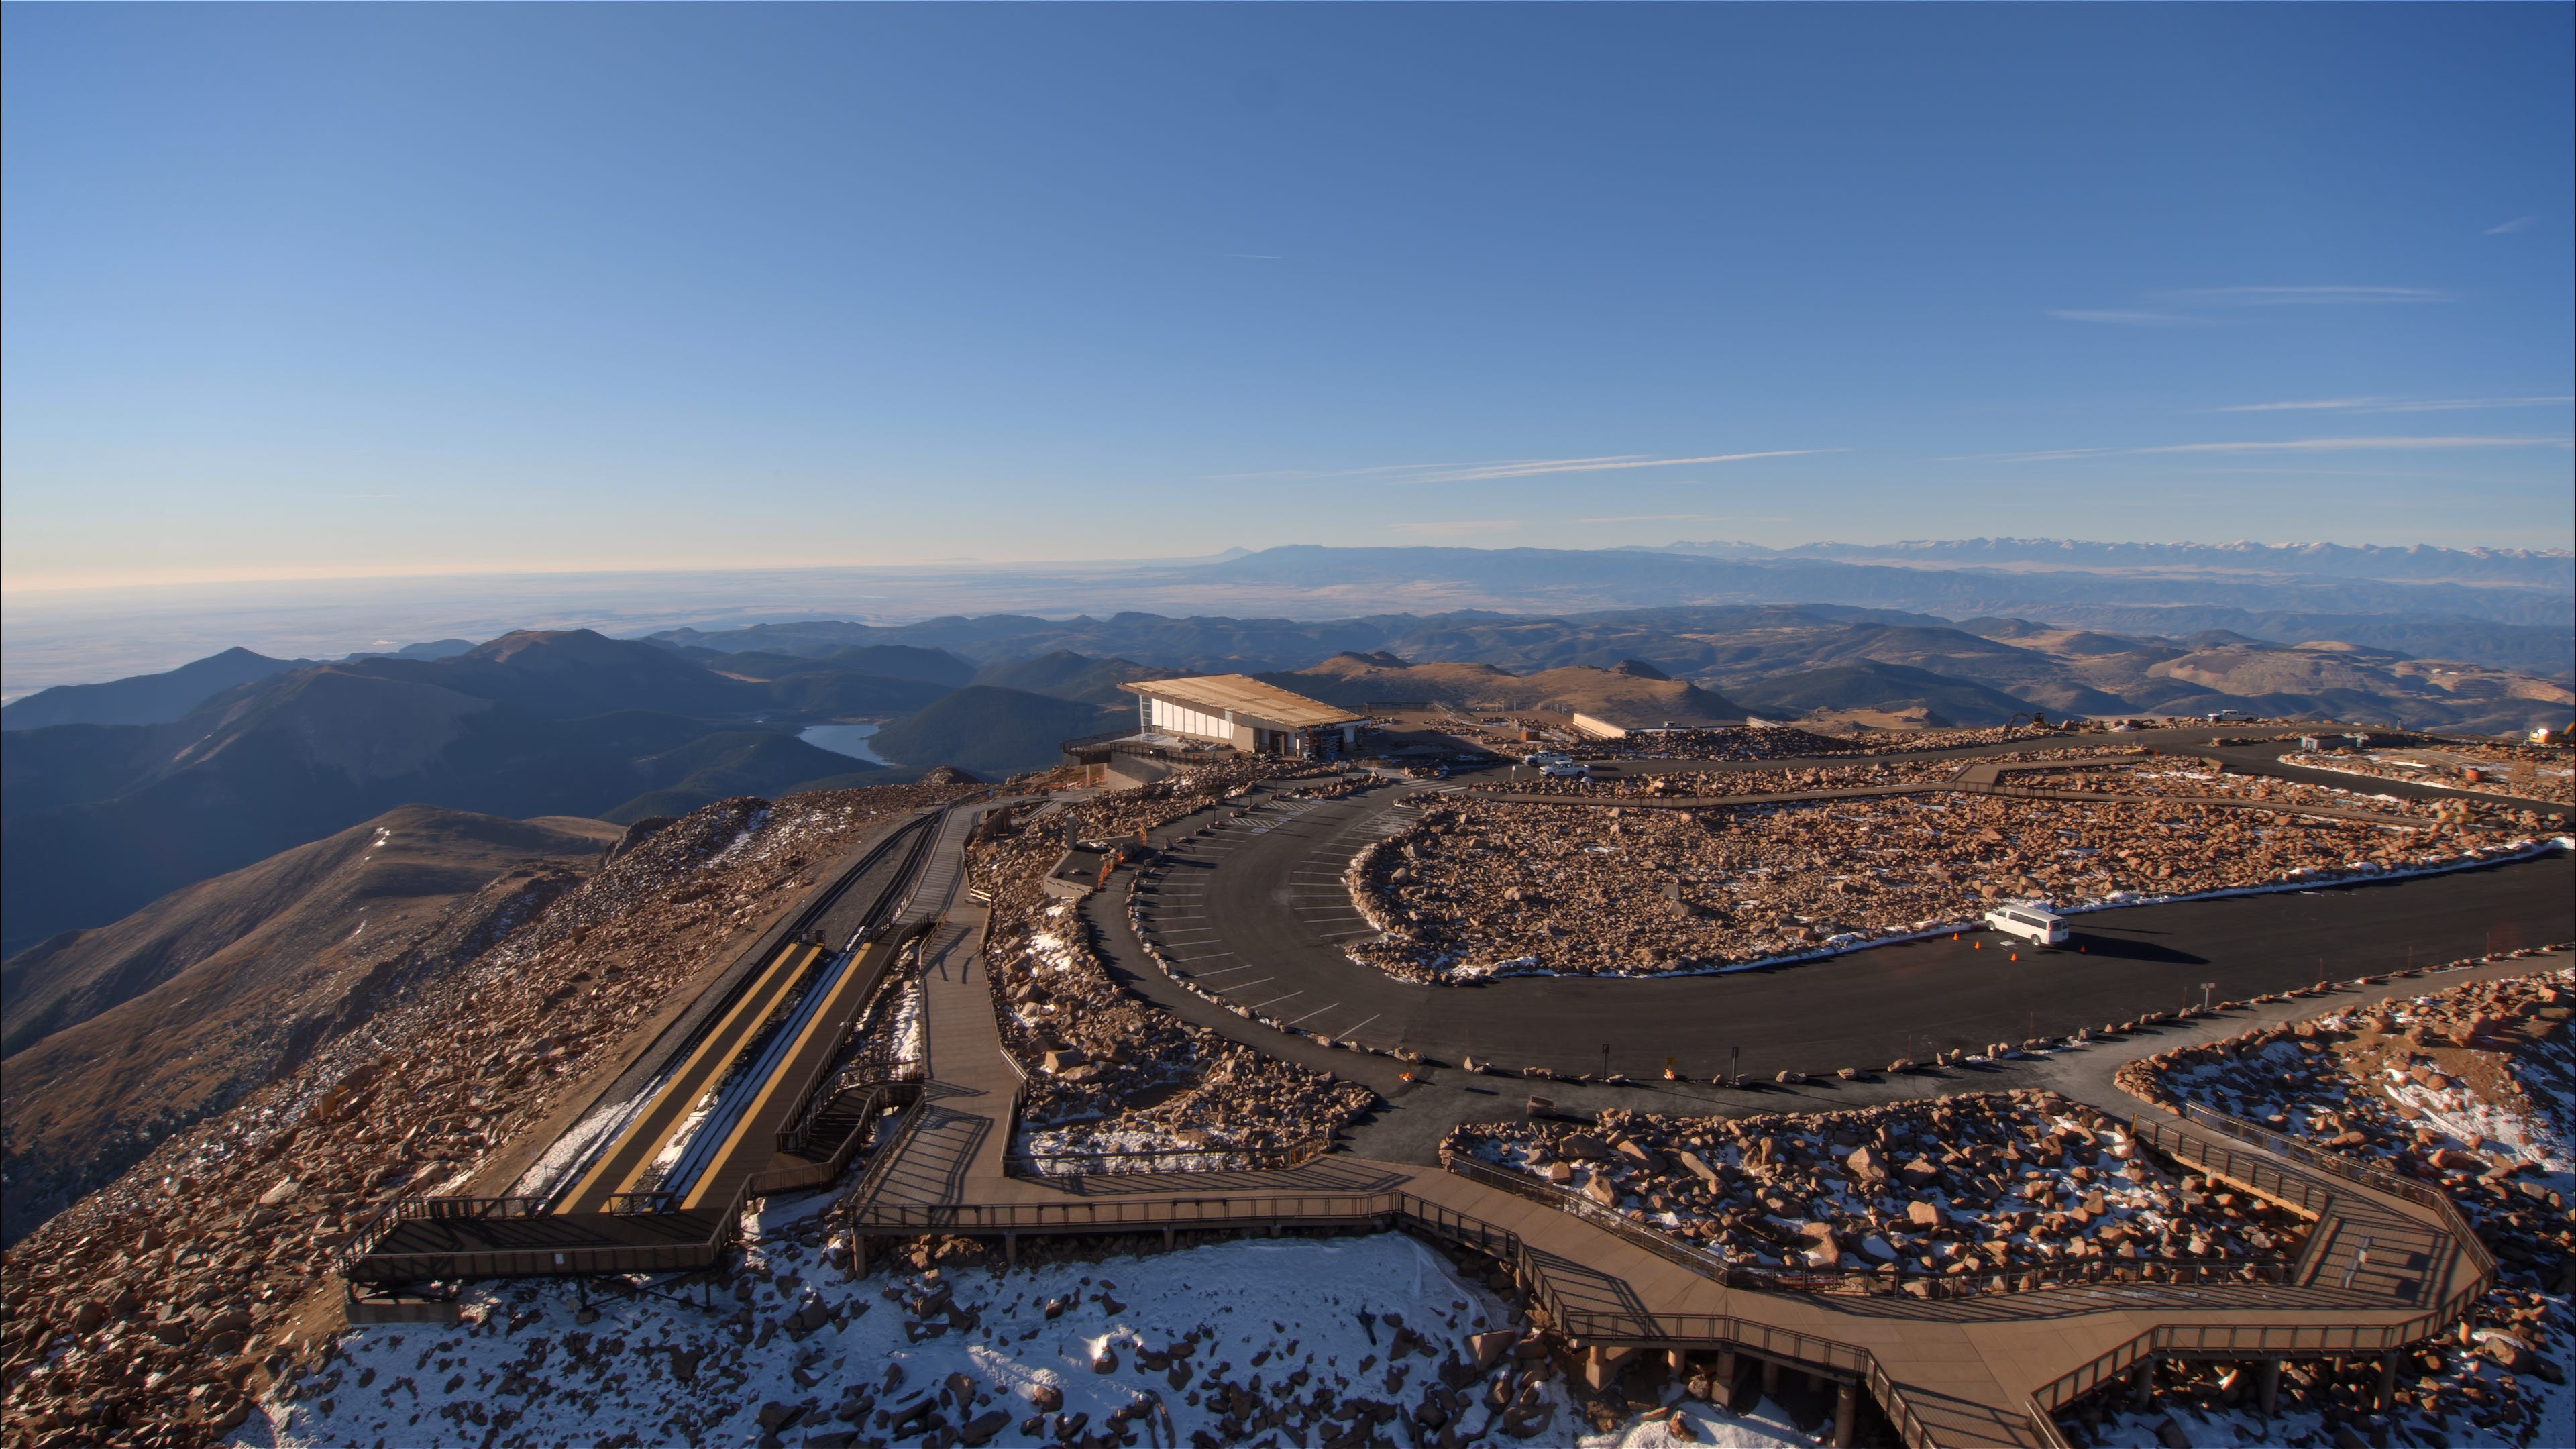 the view from above the Pikes Peak visitor center